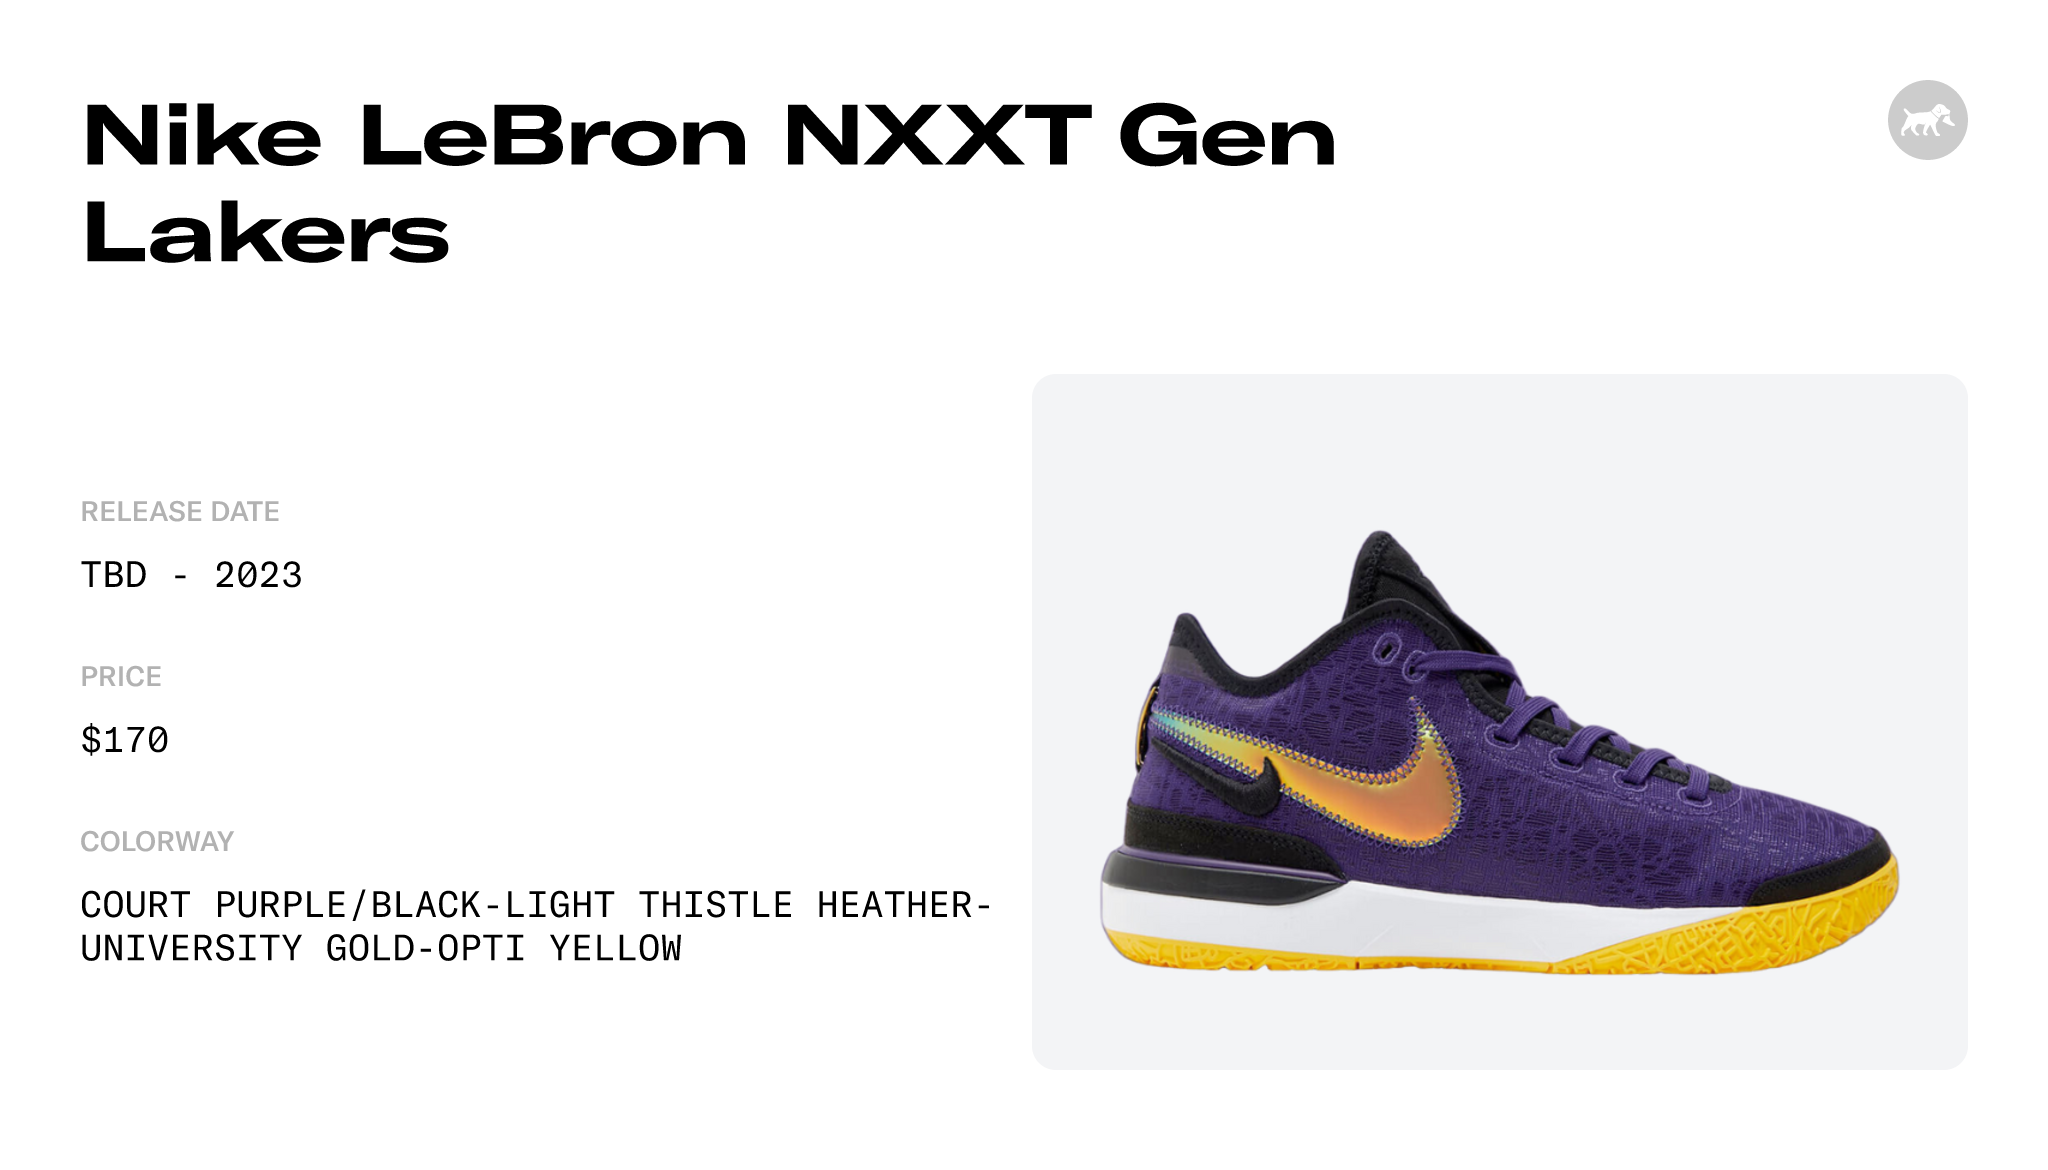 Nike LeBron NXXT Gen Lakers - DR8784-500 Raffles and Release Date